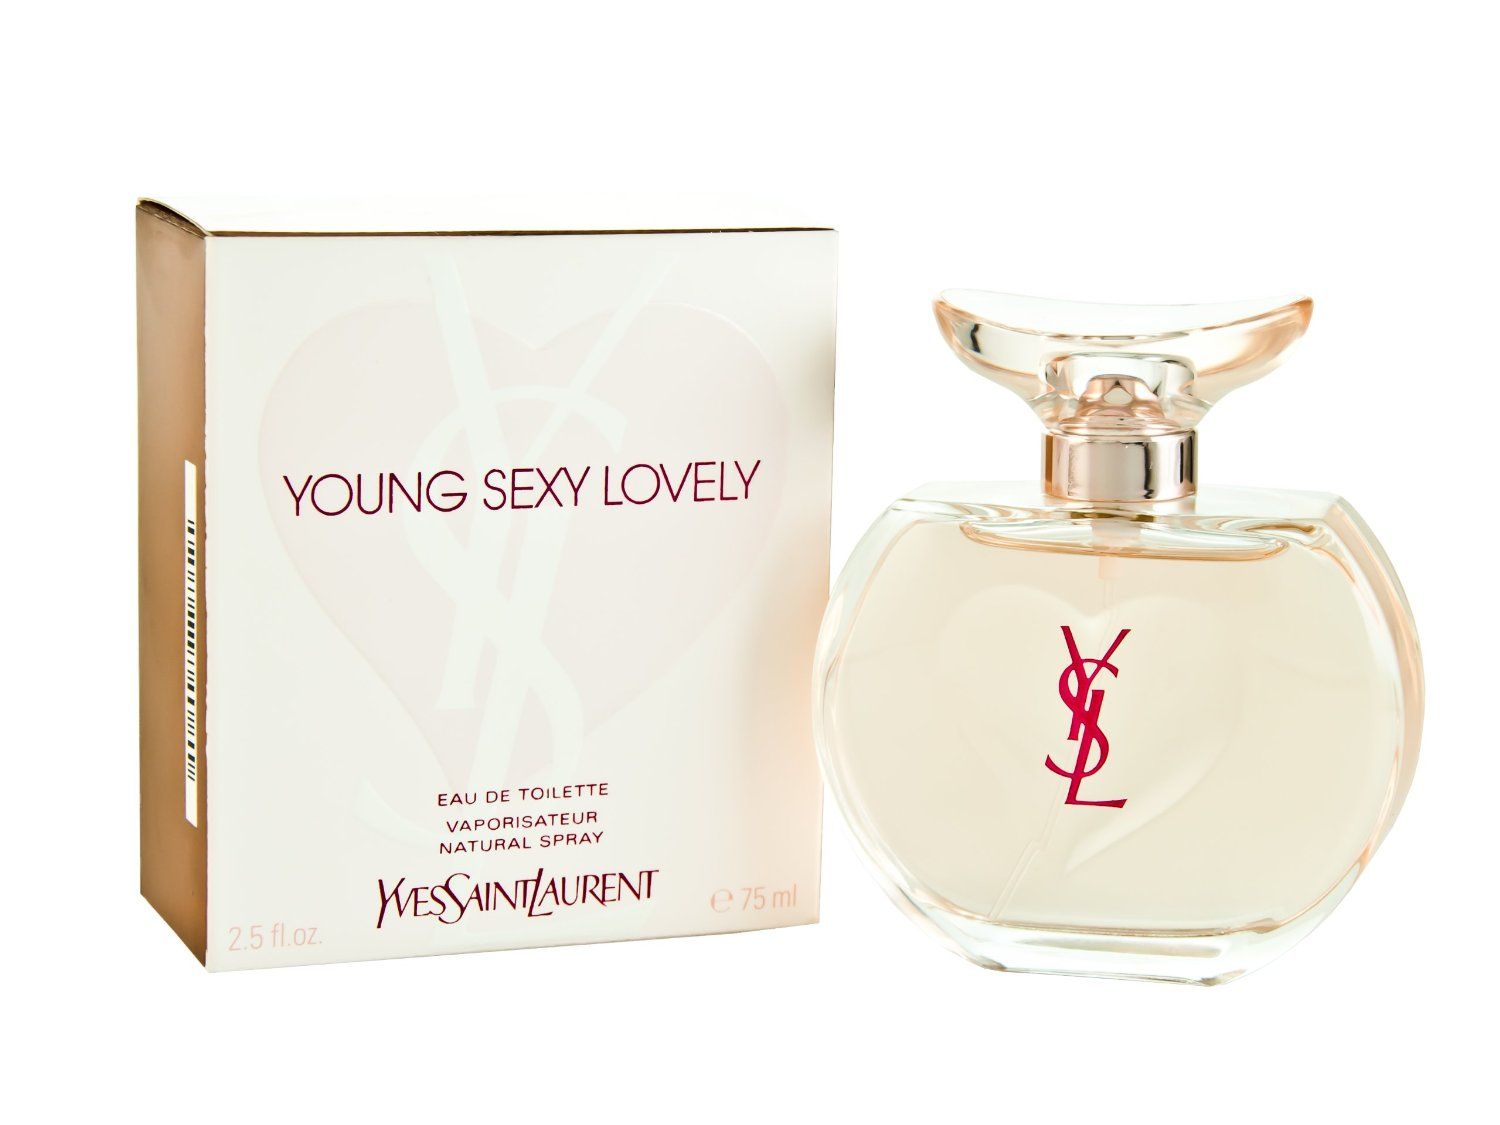 The T. reccomend Young and lovely sexy